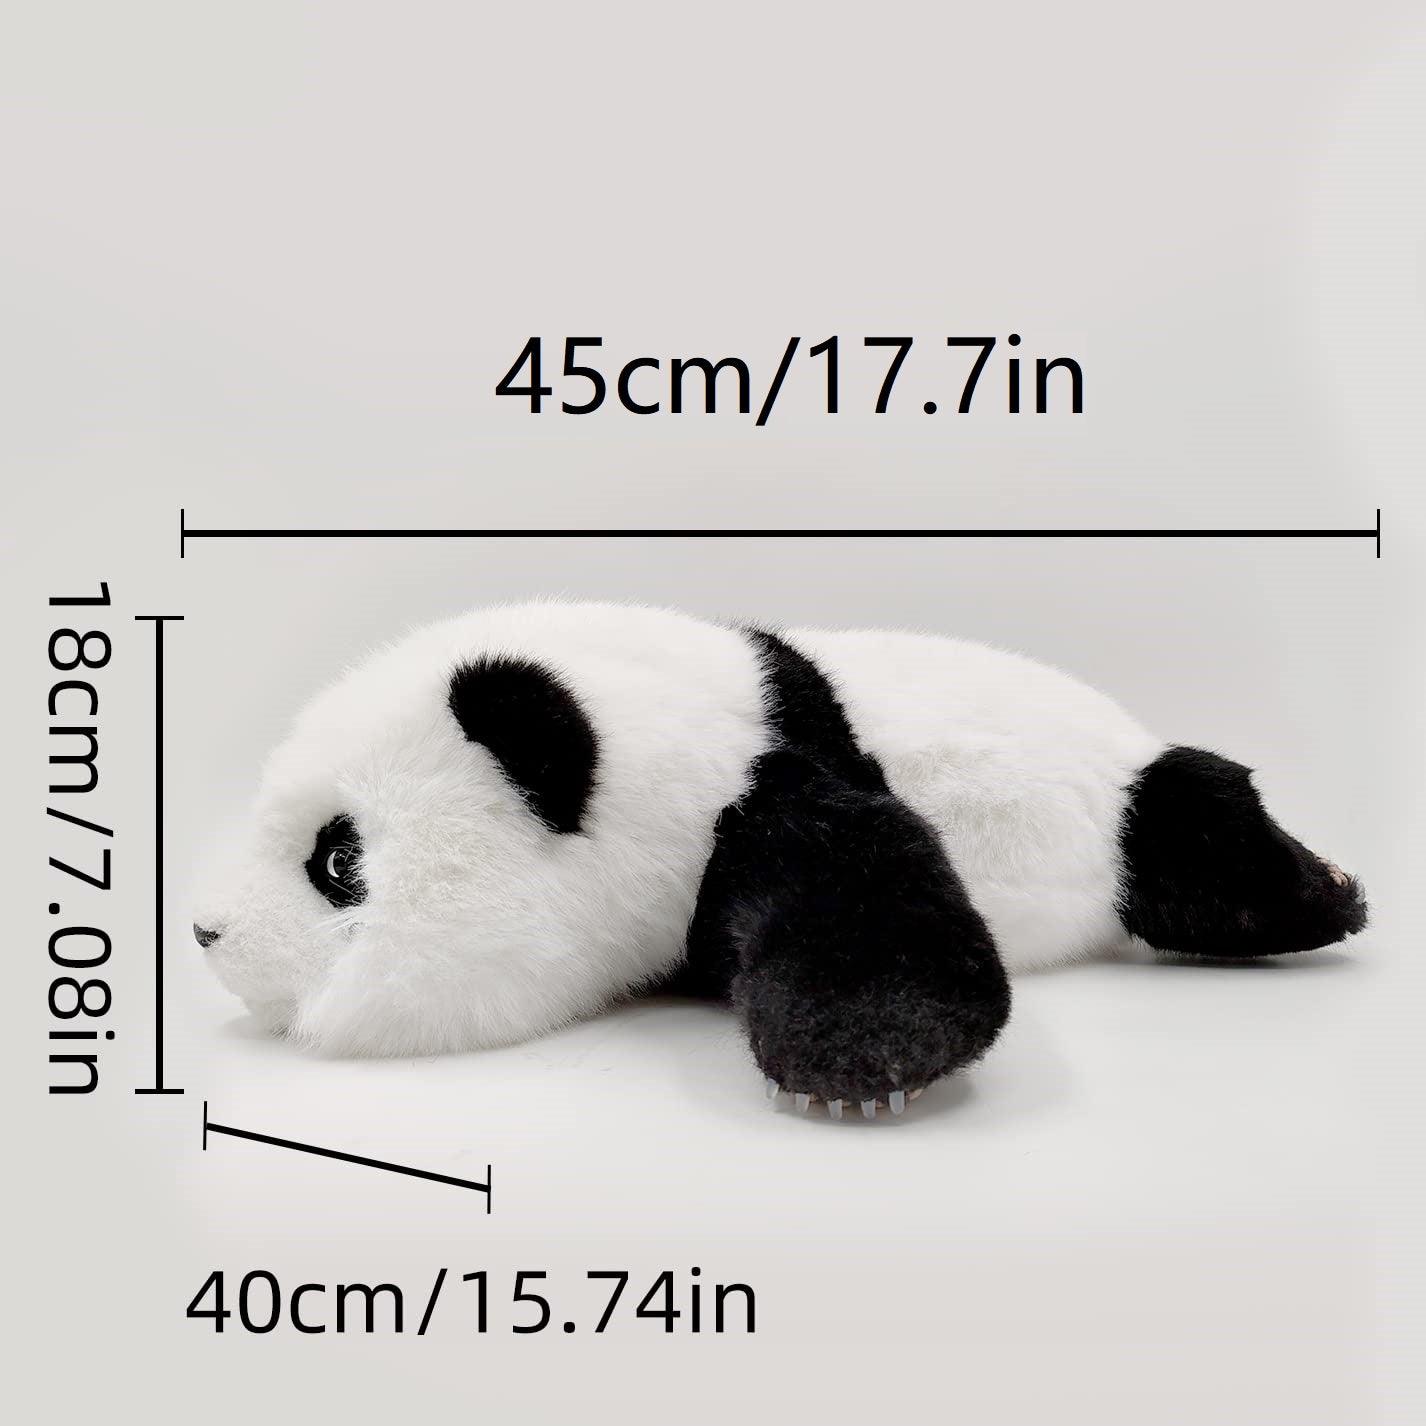 Buy Enakshi Cartoon Panda with Bamboo Pillow Stuffed Animal Toy Ornament  Sleeping Pillow 40cm|Home & Garden | Home D?©cor | Pillows Online at Low  Prices in India - Amazon.in